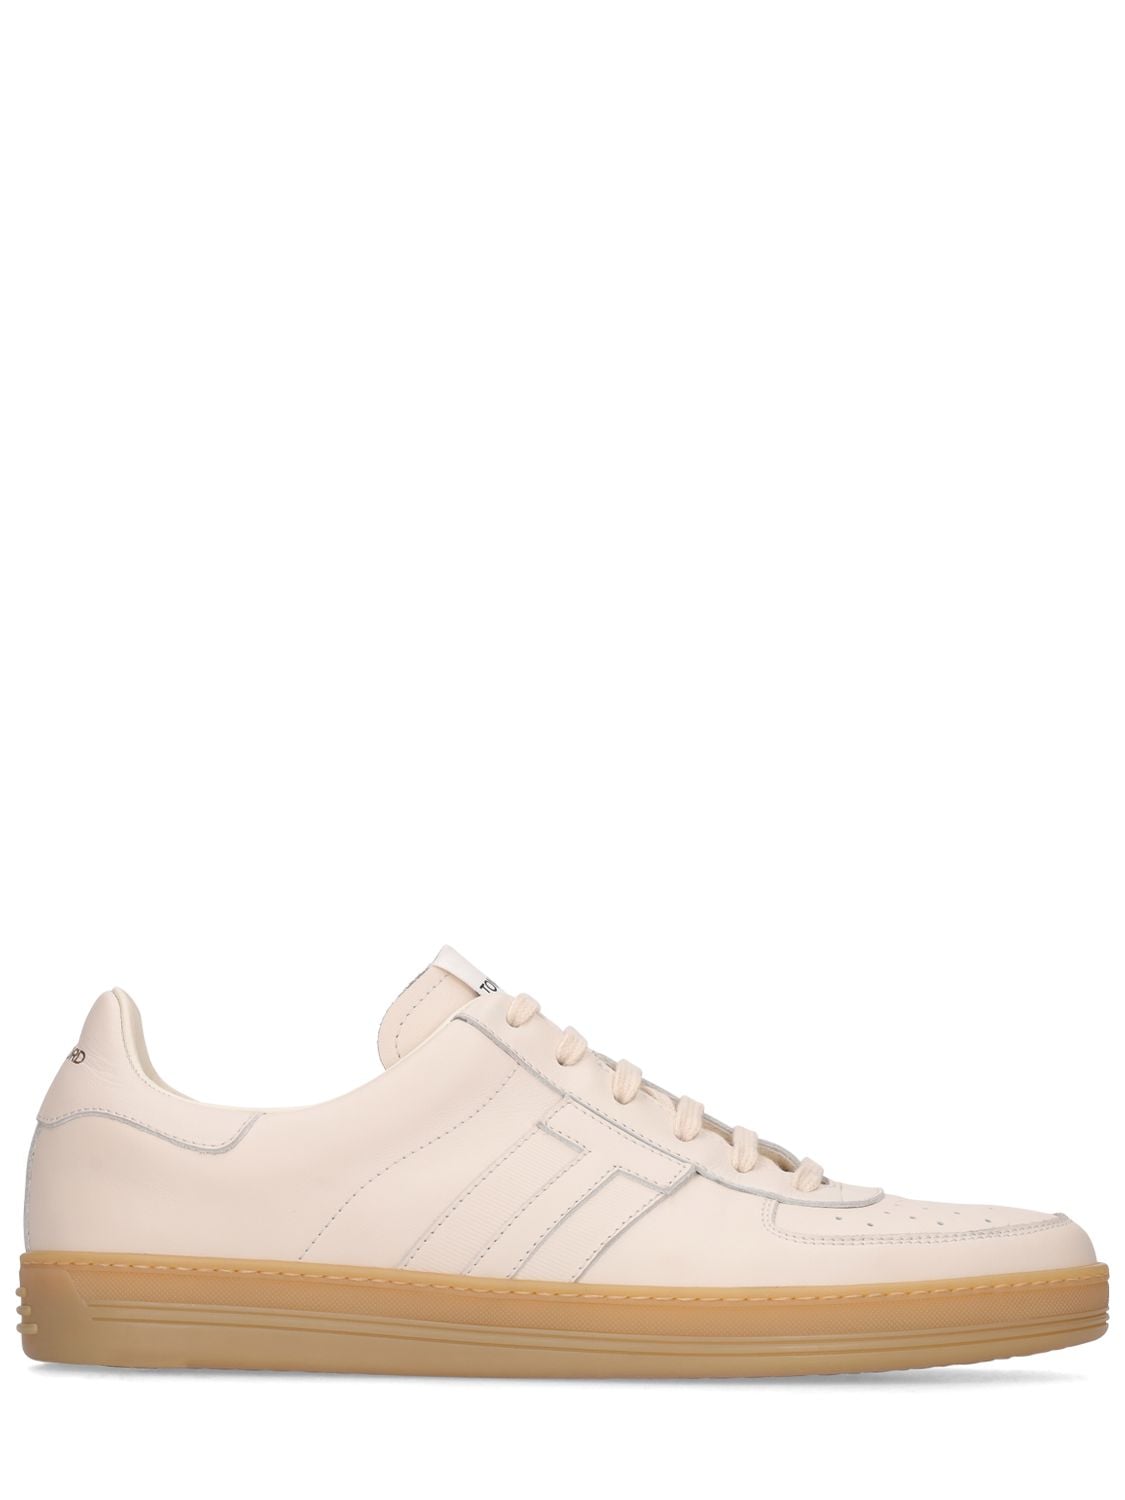 TOM FORD SMOOTH LEATHER LOW TOP SNEAKERS